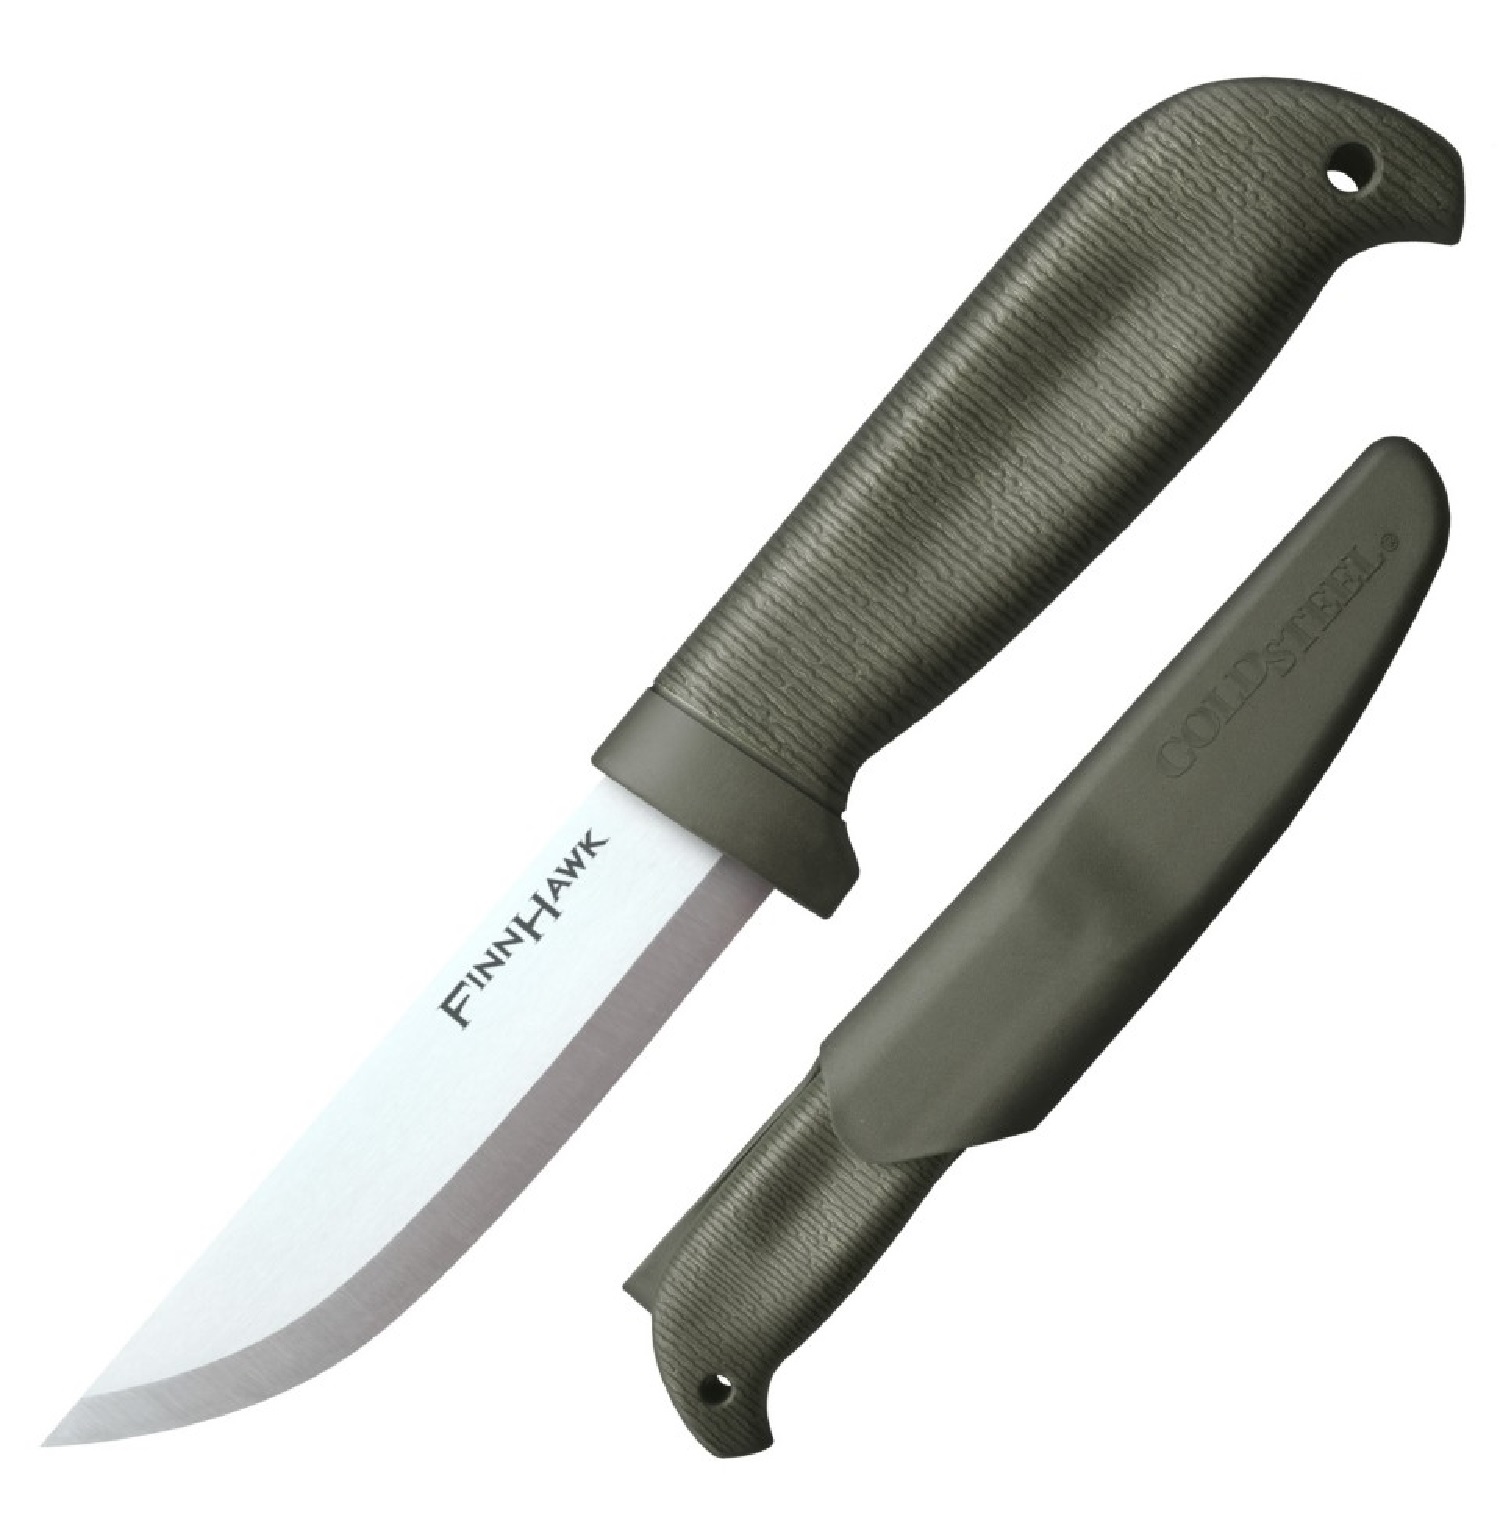 Cold Steel 4" Fixed Blade Knife